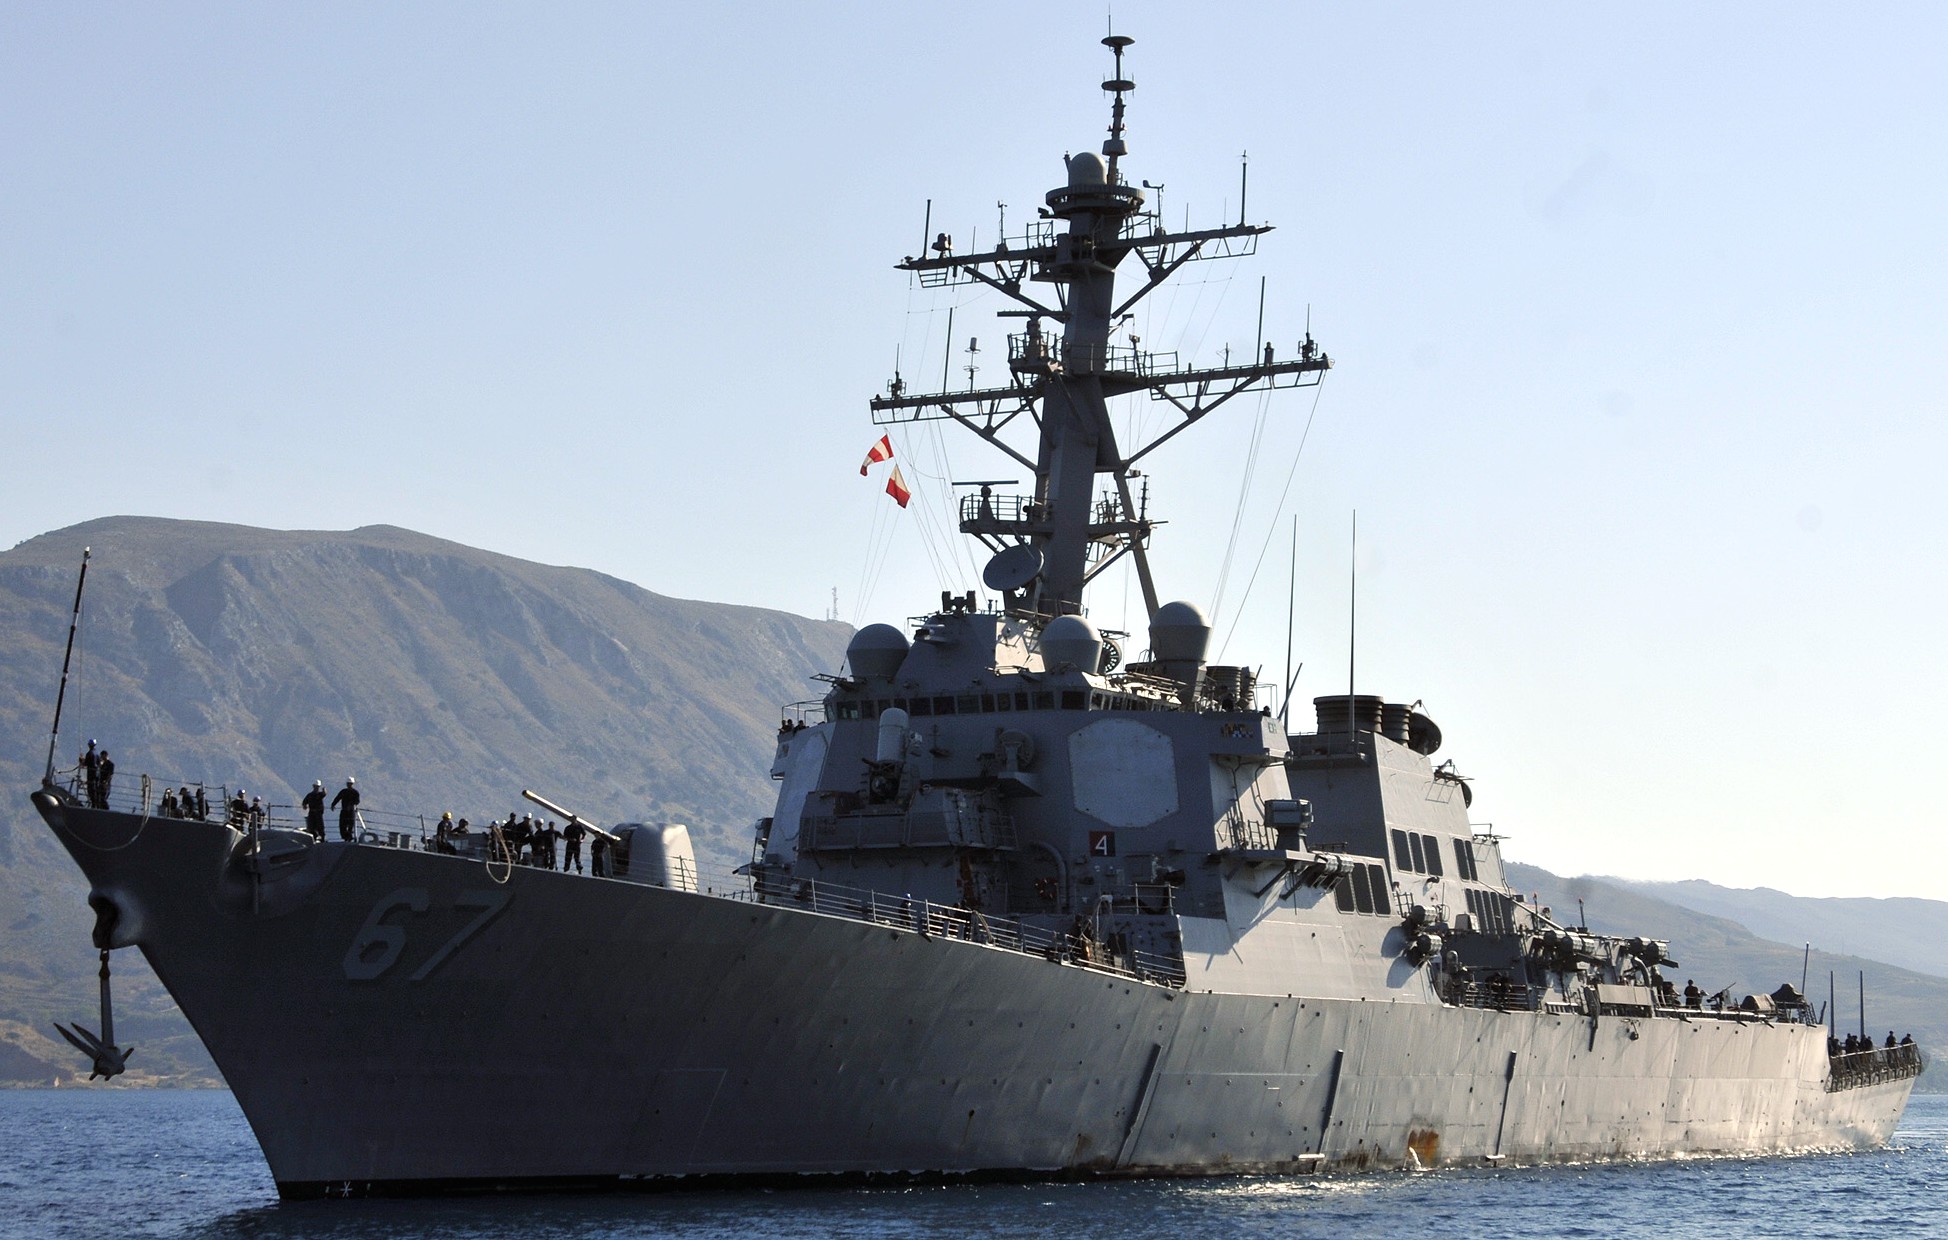 ddg-67 uss cole guided missile destroyer arleigh burke class navy aegis 22